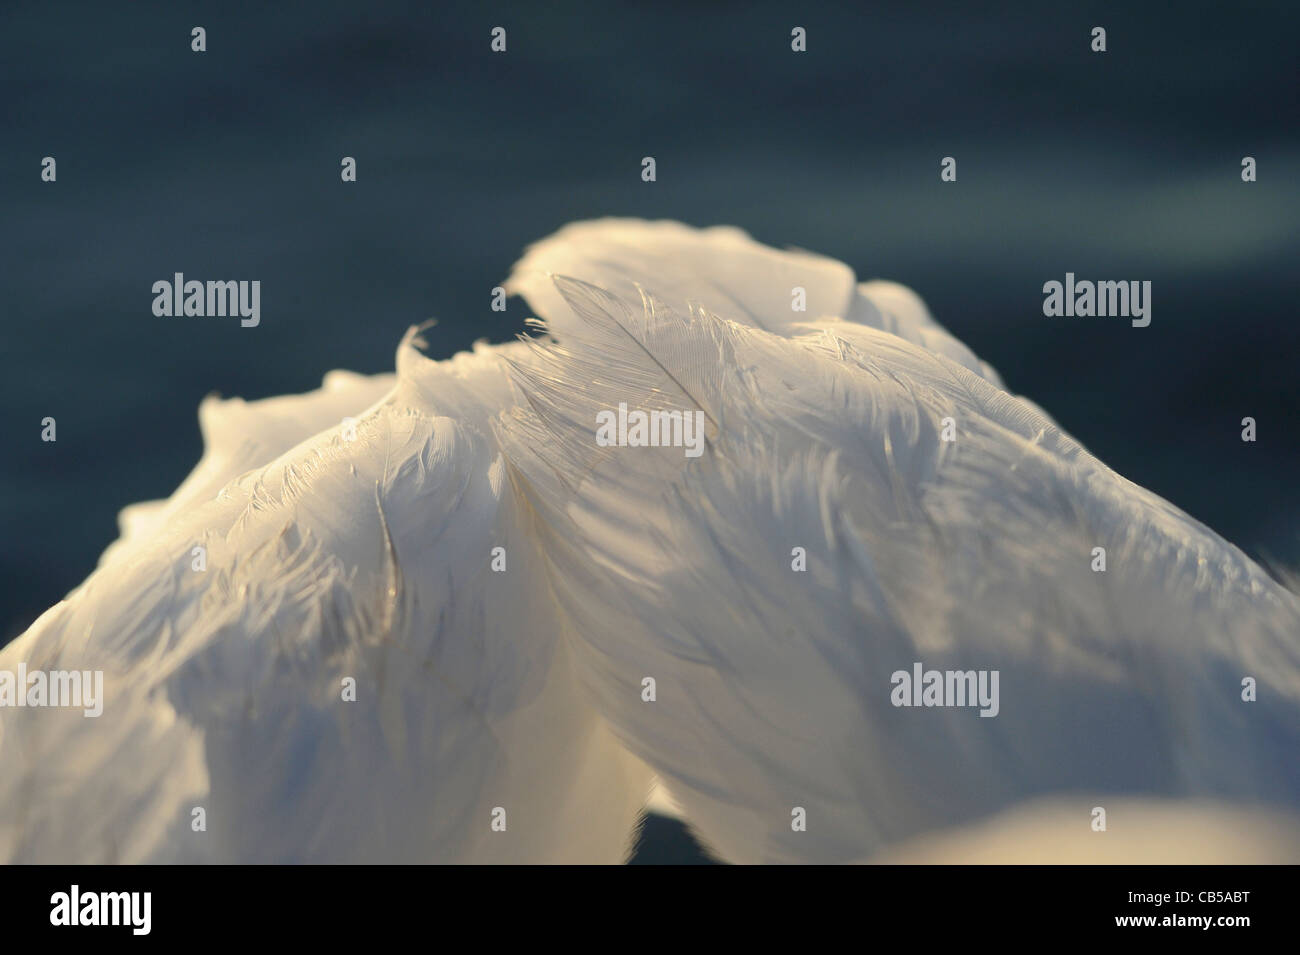 White feathers on a adult mute swan shown fine detail Stock Photo